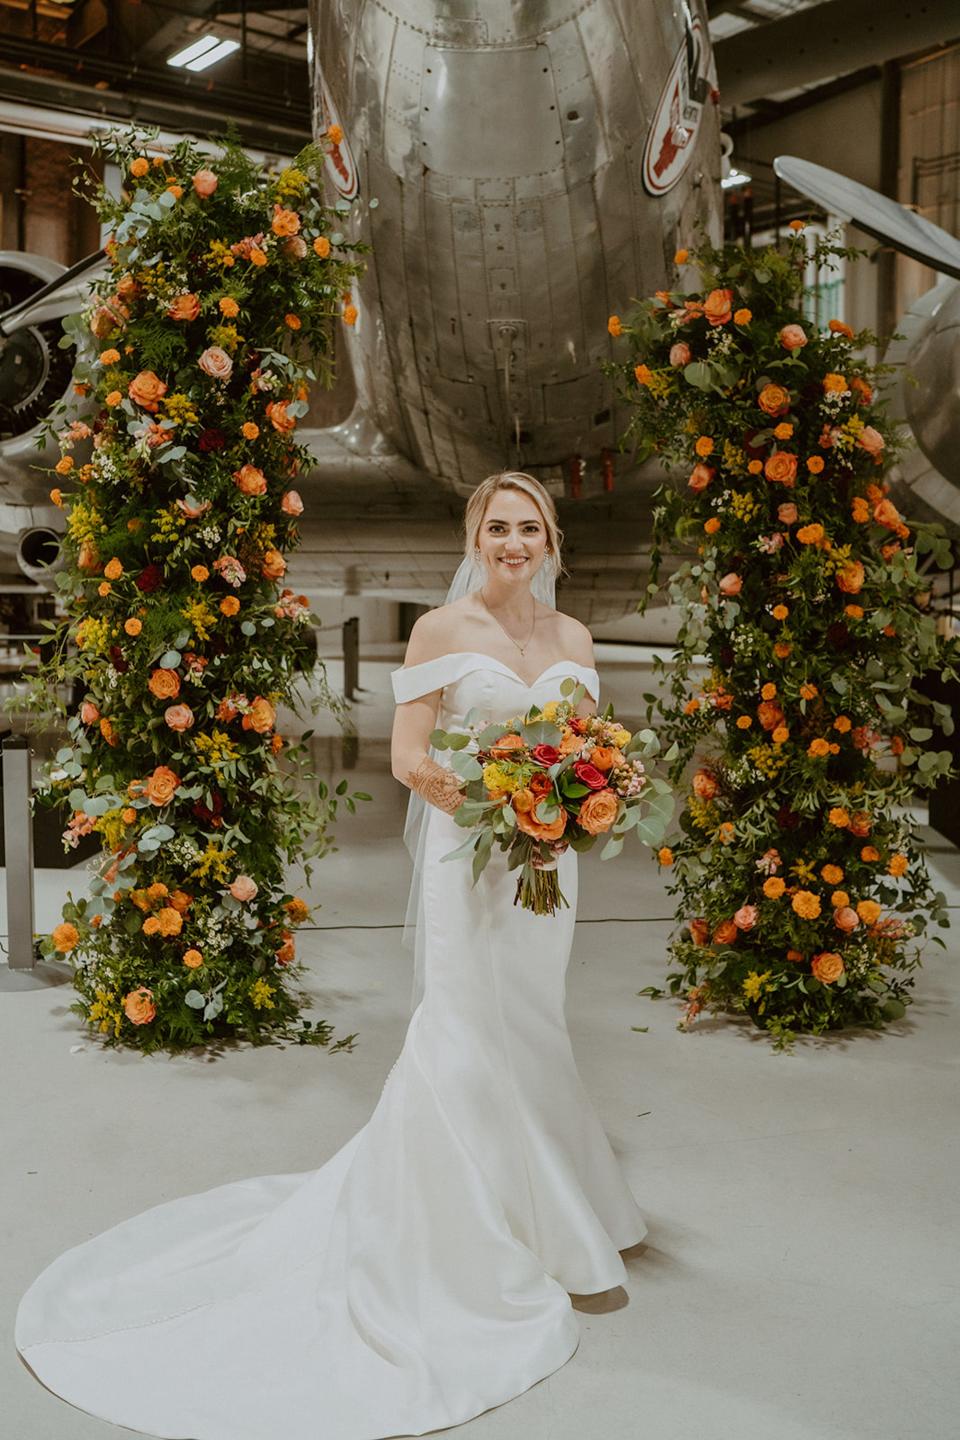 A bride in a white wedding dress stands in front of a floral archway and a plane.